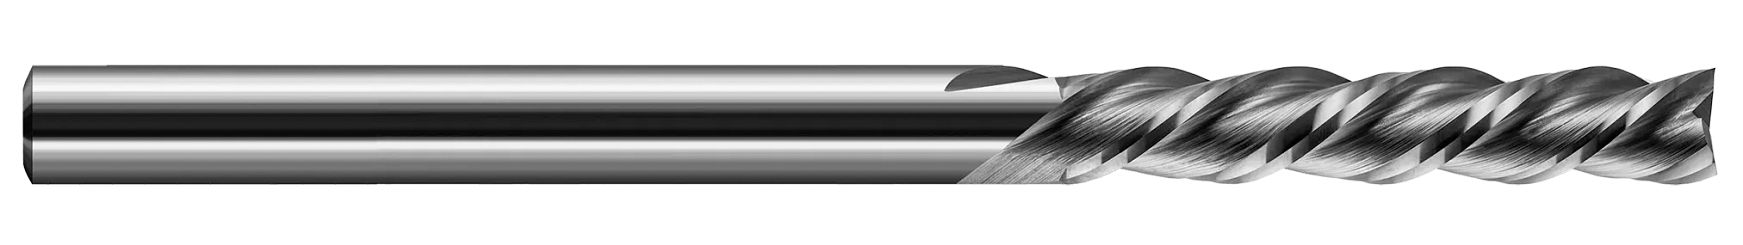 End Mills for Plastics-Finishers-Square Downcut-3 Flute-High Helix